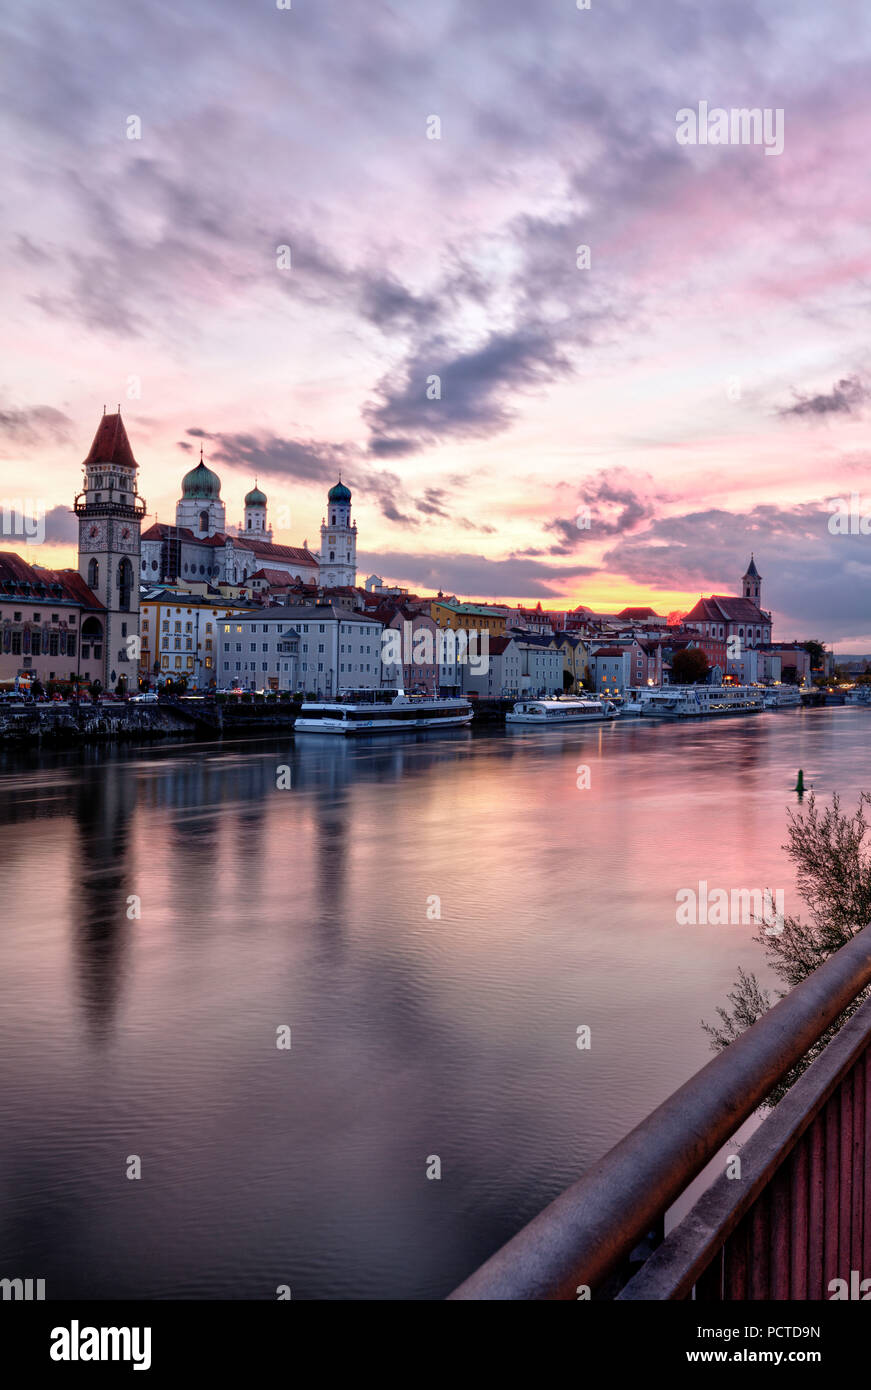 View over the Danube, Passau, old town, blue hour, Lower Bavaria, Bavaria, Germany, Europe, Stock Photo